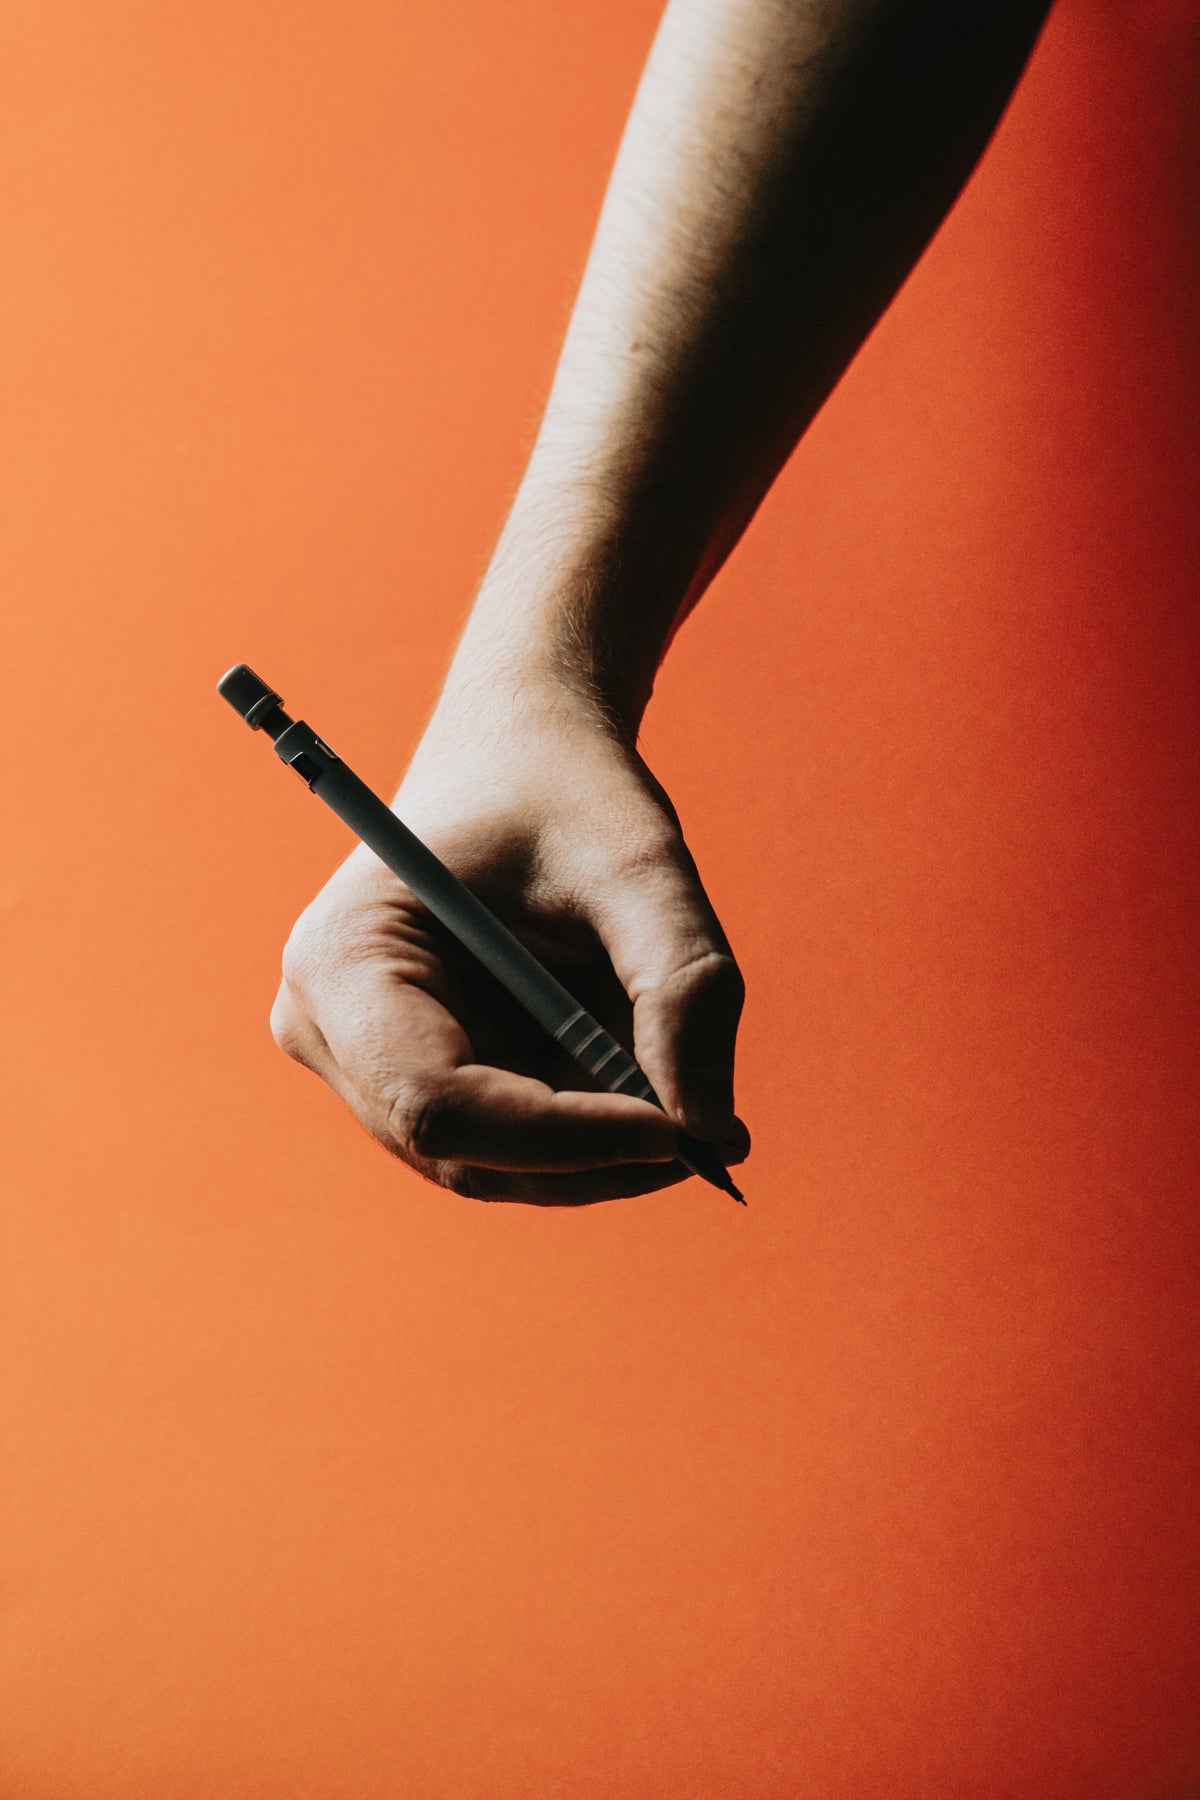 photo of a hand holding a pen